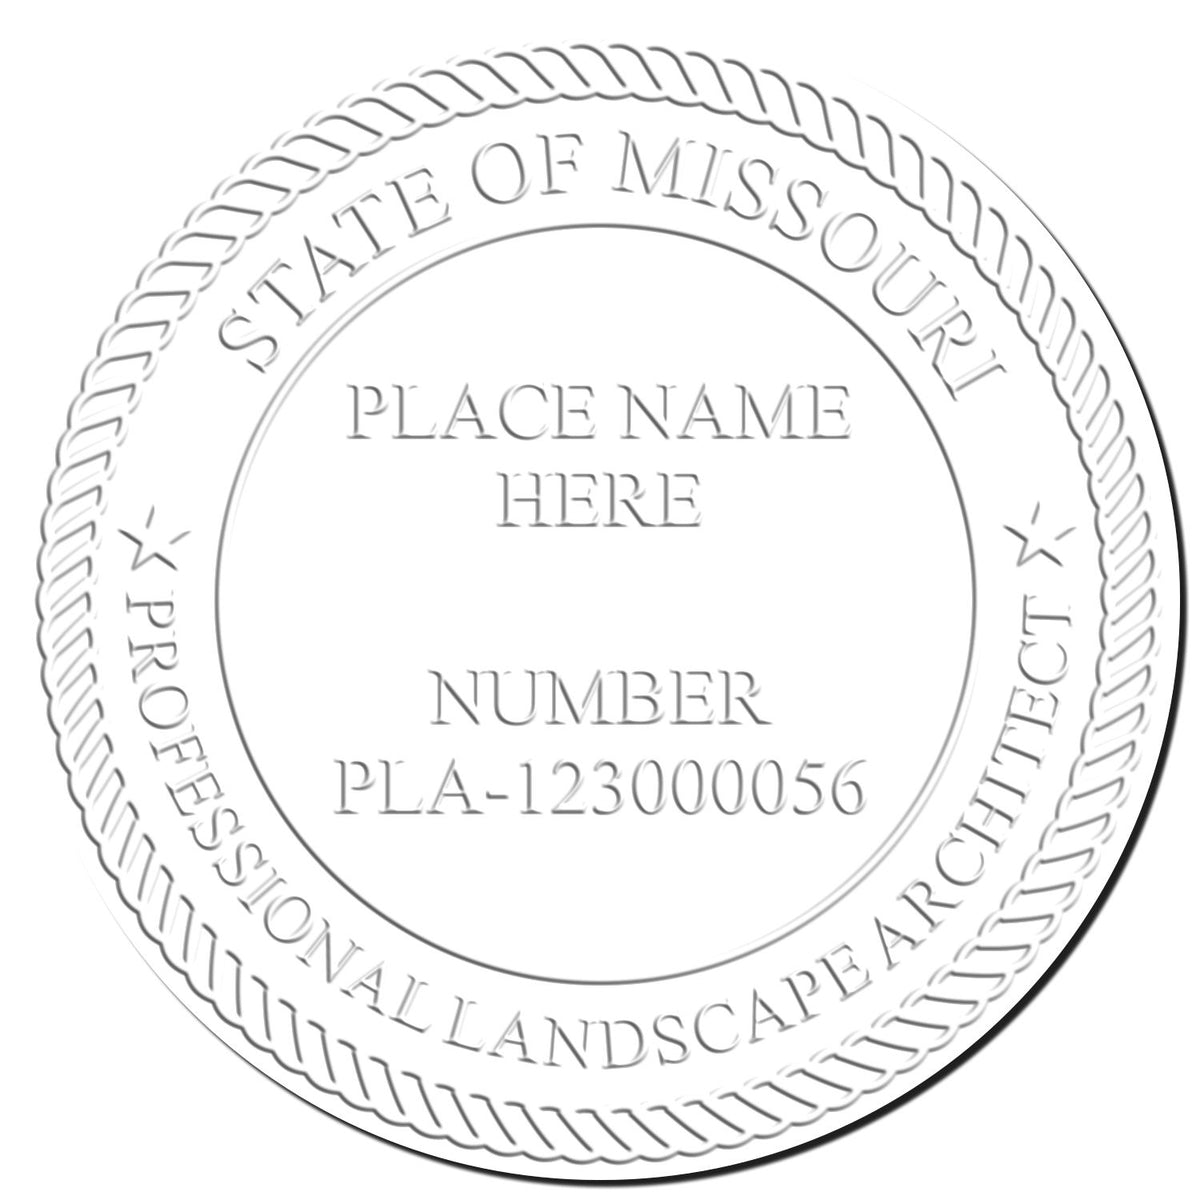 This paper is stamped with a sample imprint of the Soft Pocket Missouri Landscape Architect Embosser, signifying its quality and reliability.